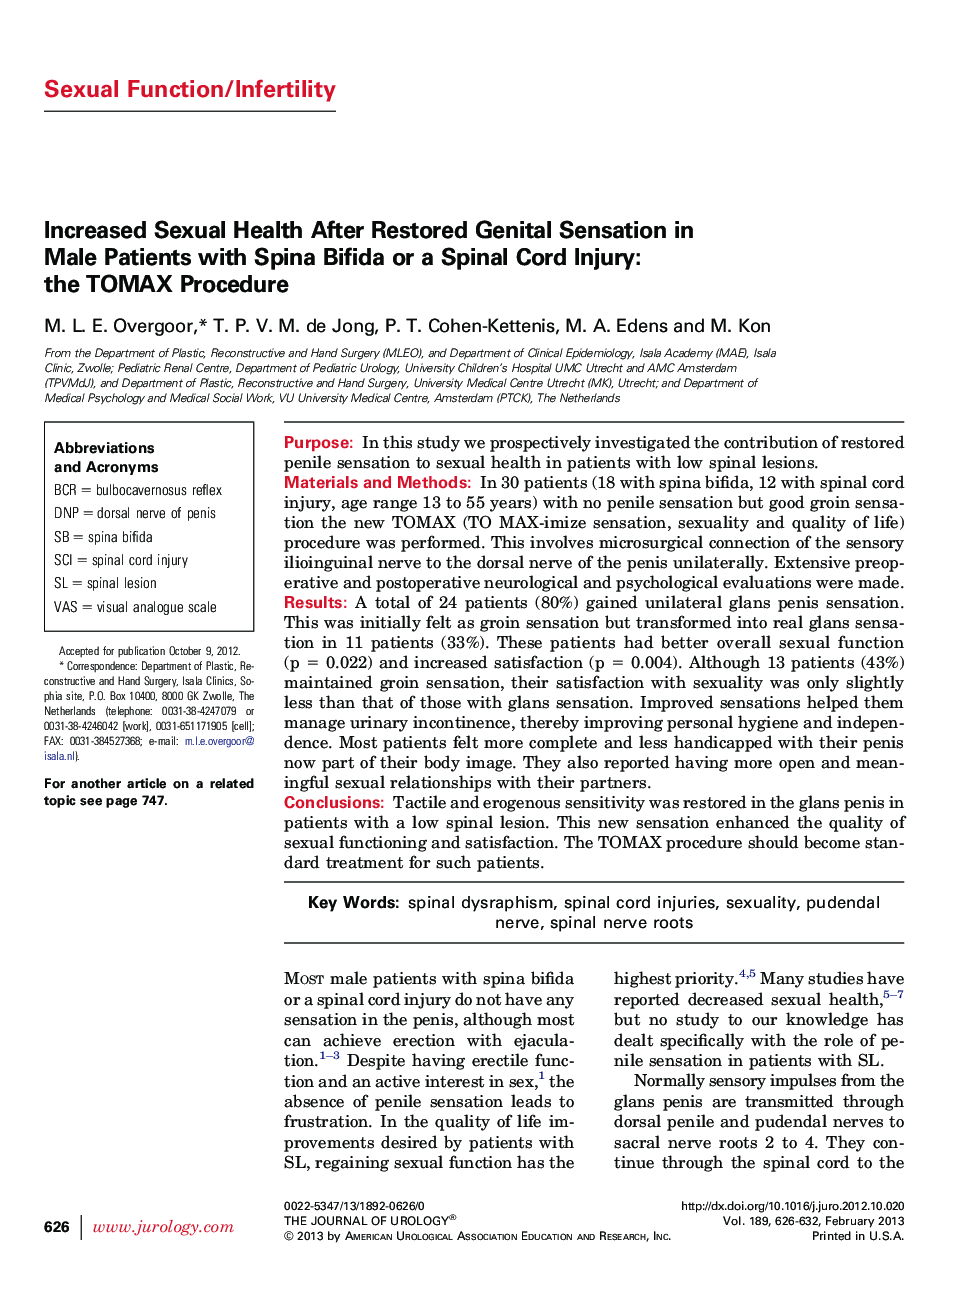 Increased Sexual Health After Restored Genital Sensation in Male Patients with Spina Bifida or a Spinal Cord Injury: the TOMAX Procedure